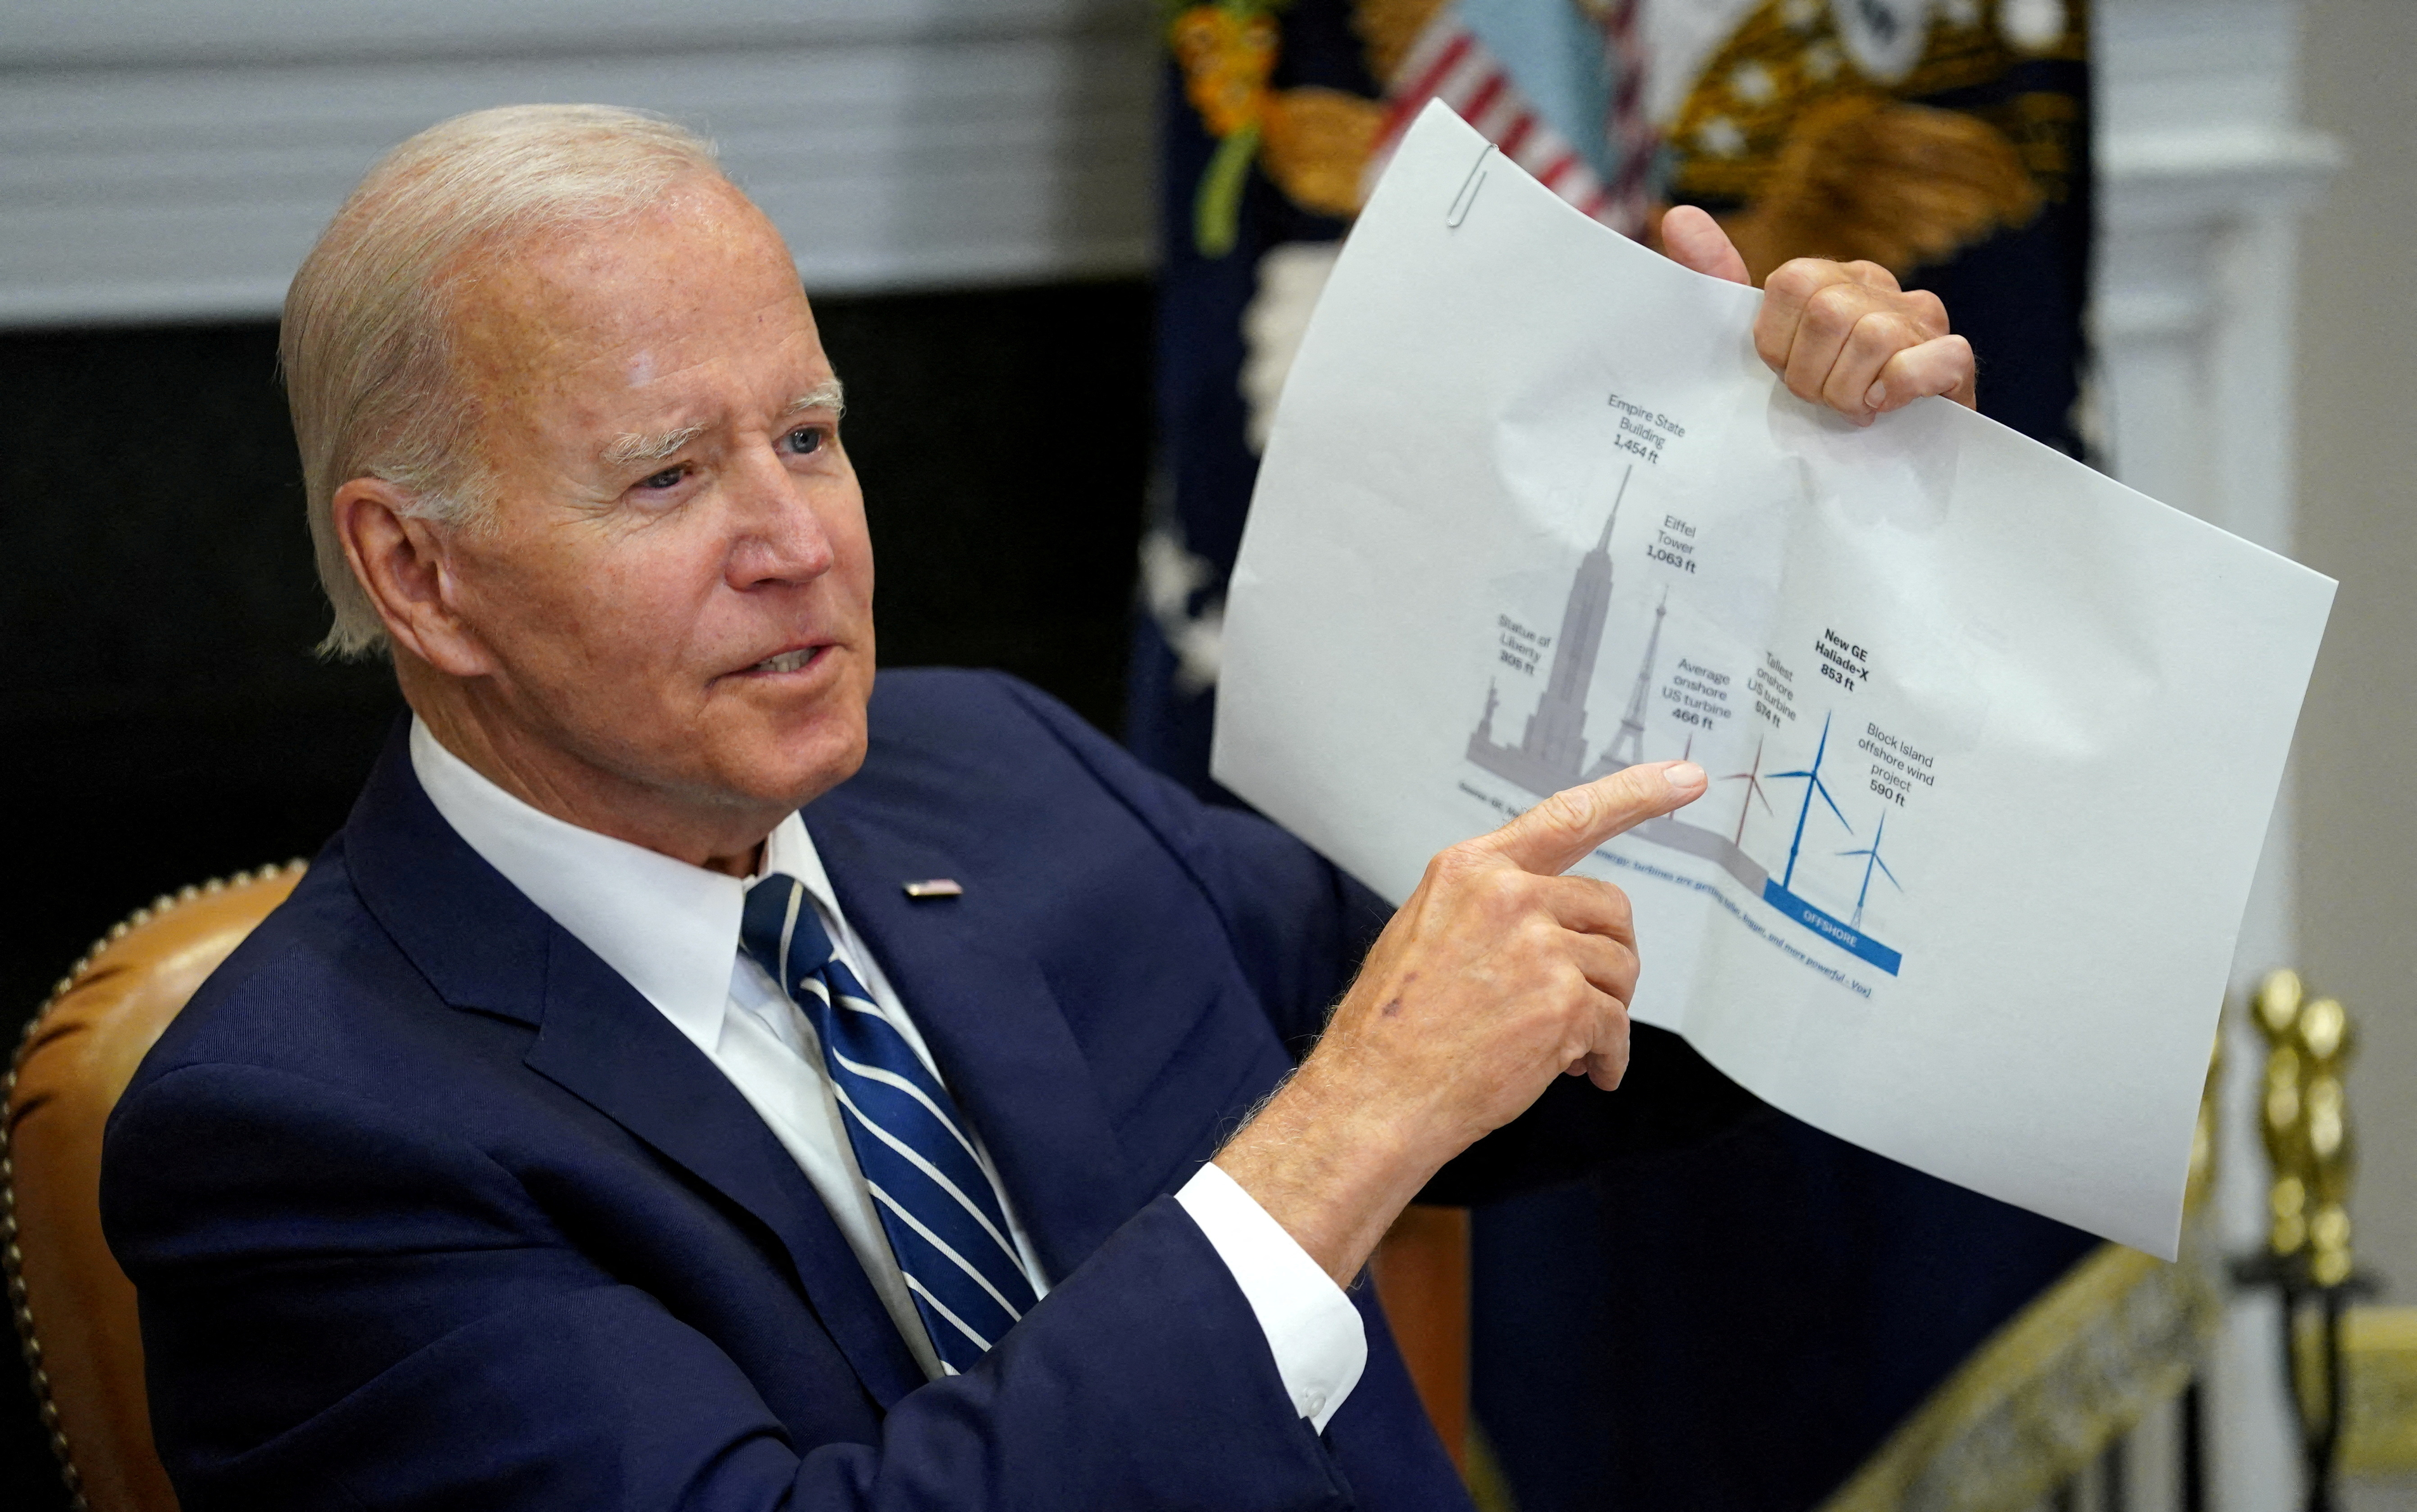 &copy; Reuters. FILE PHOTO: U.S. President Joe Biden holds up a wind turbine size comparison chart while attending a meeting with governors, labor leaders, and private companies launching the Federal-State Offshore Wind Implementation Partnership, at the White House in W